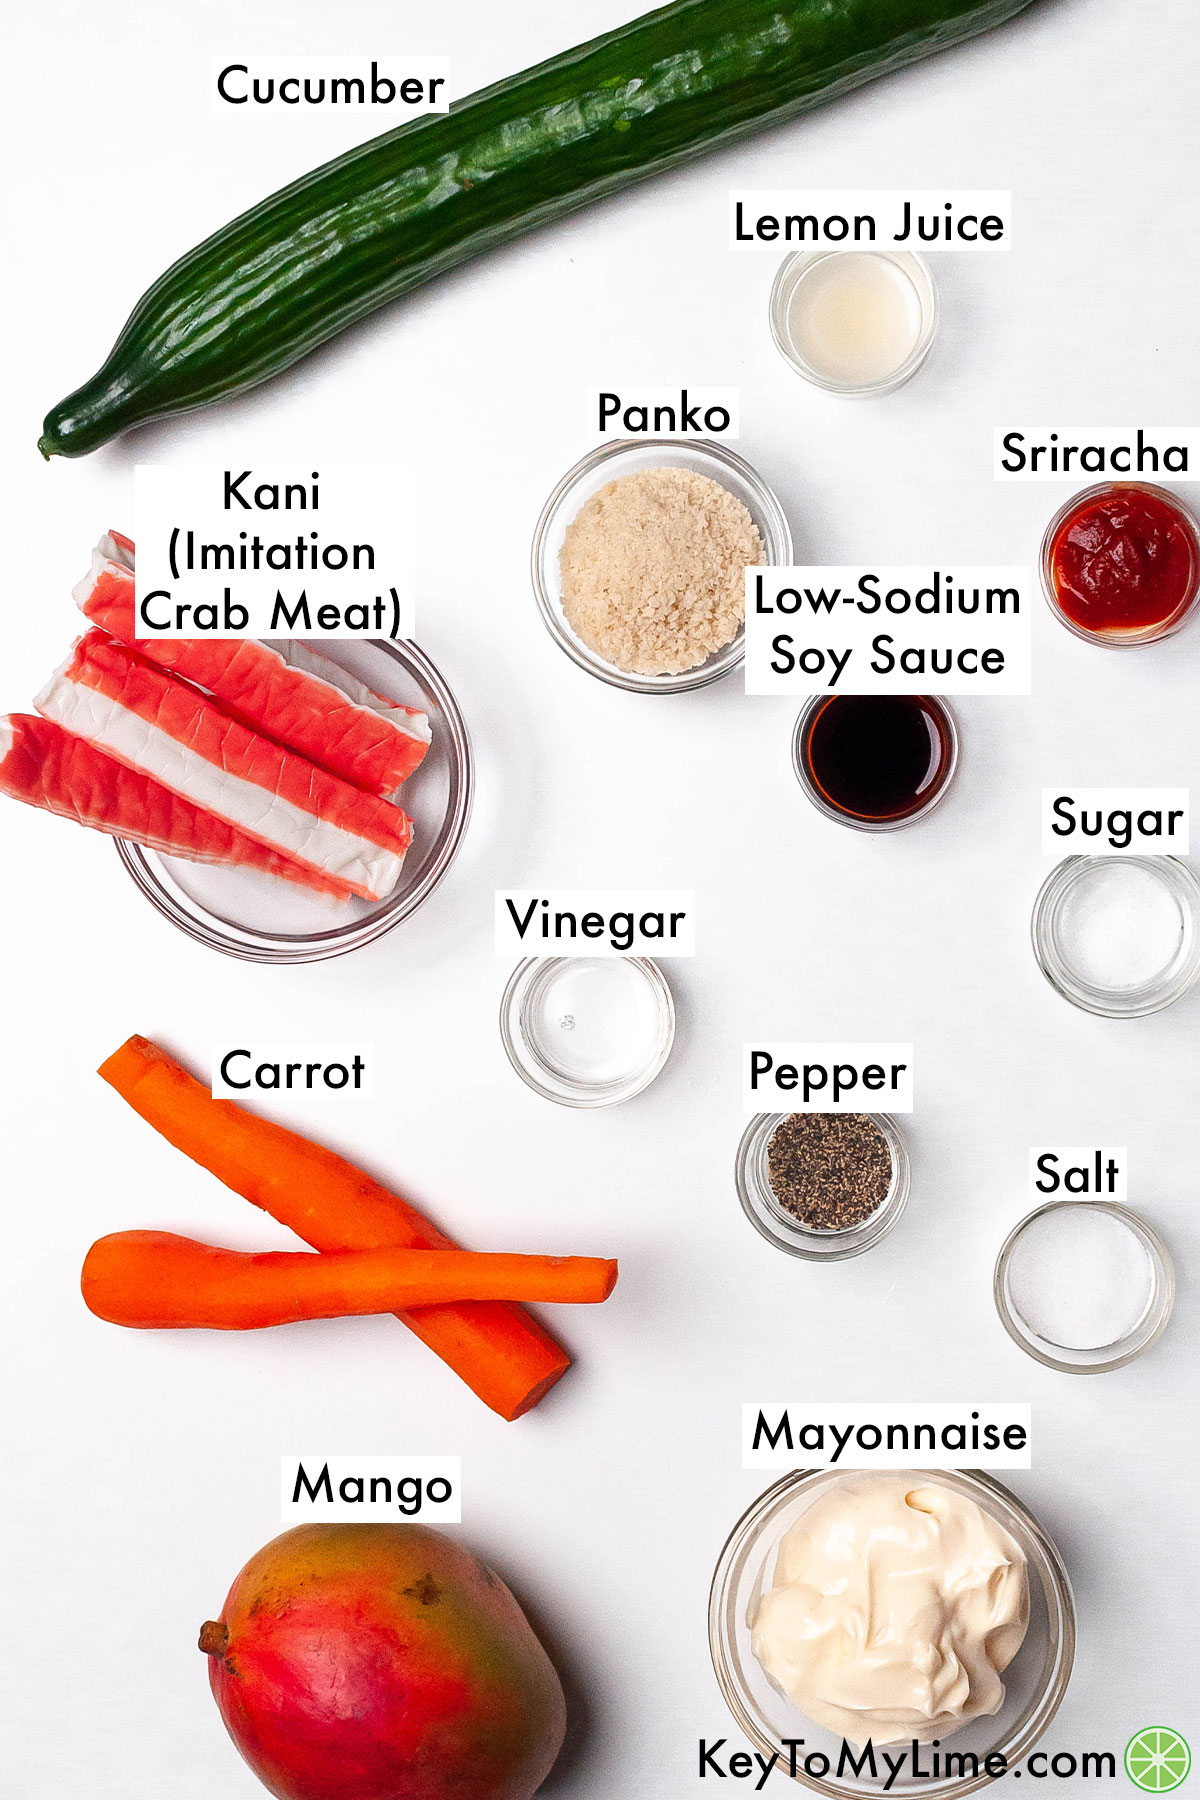 The labeled ingredients for kani salad.